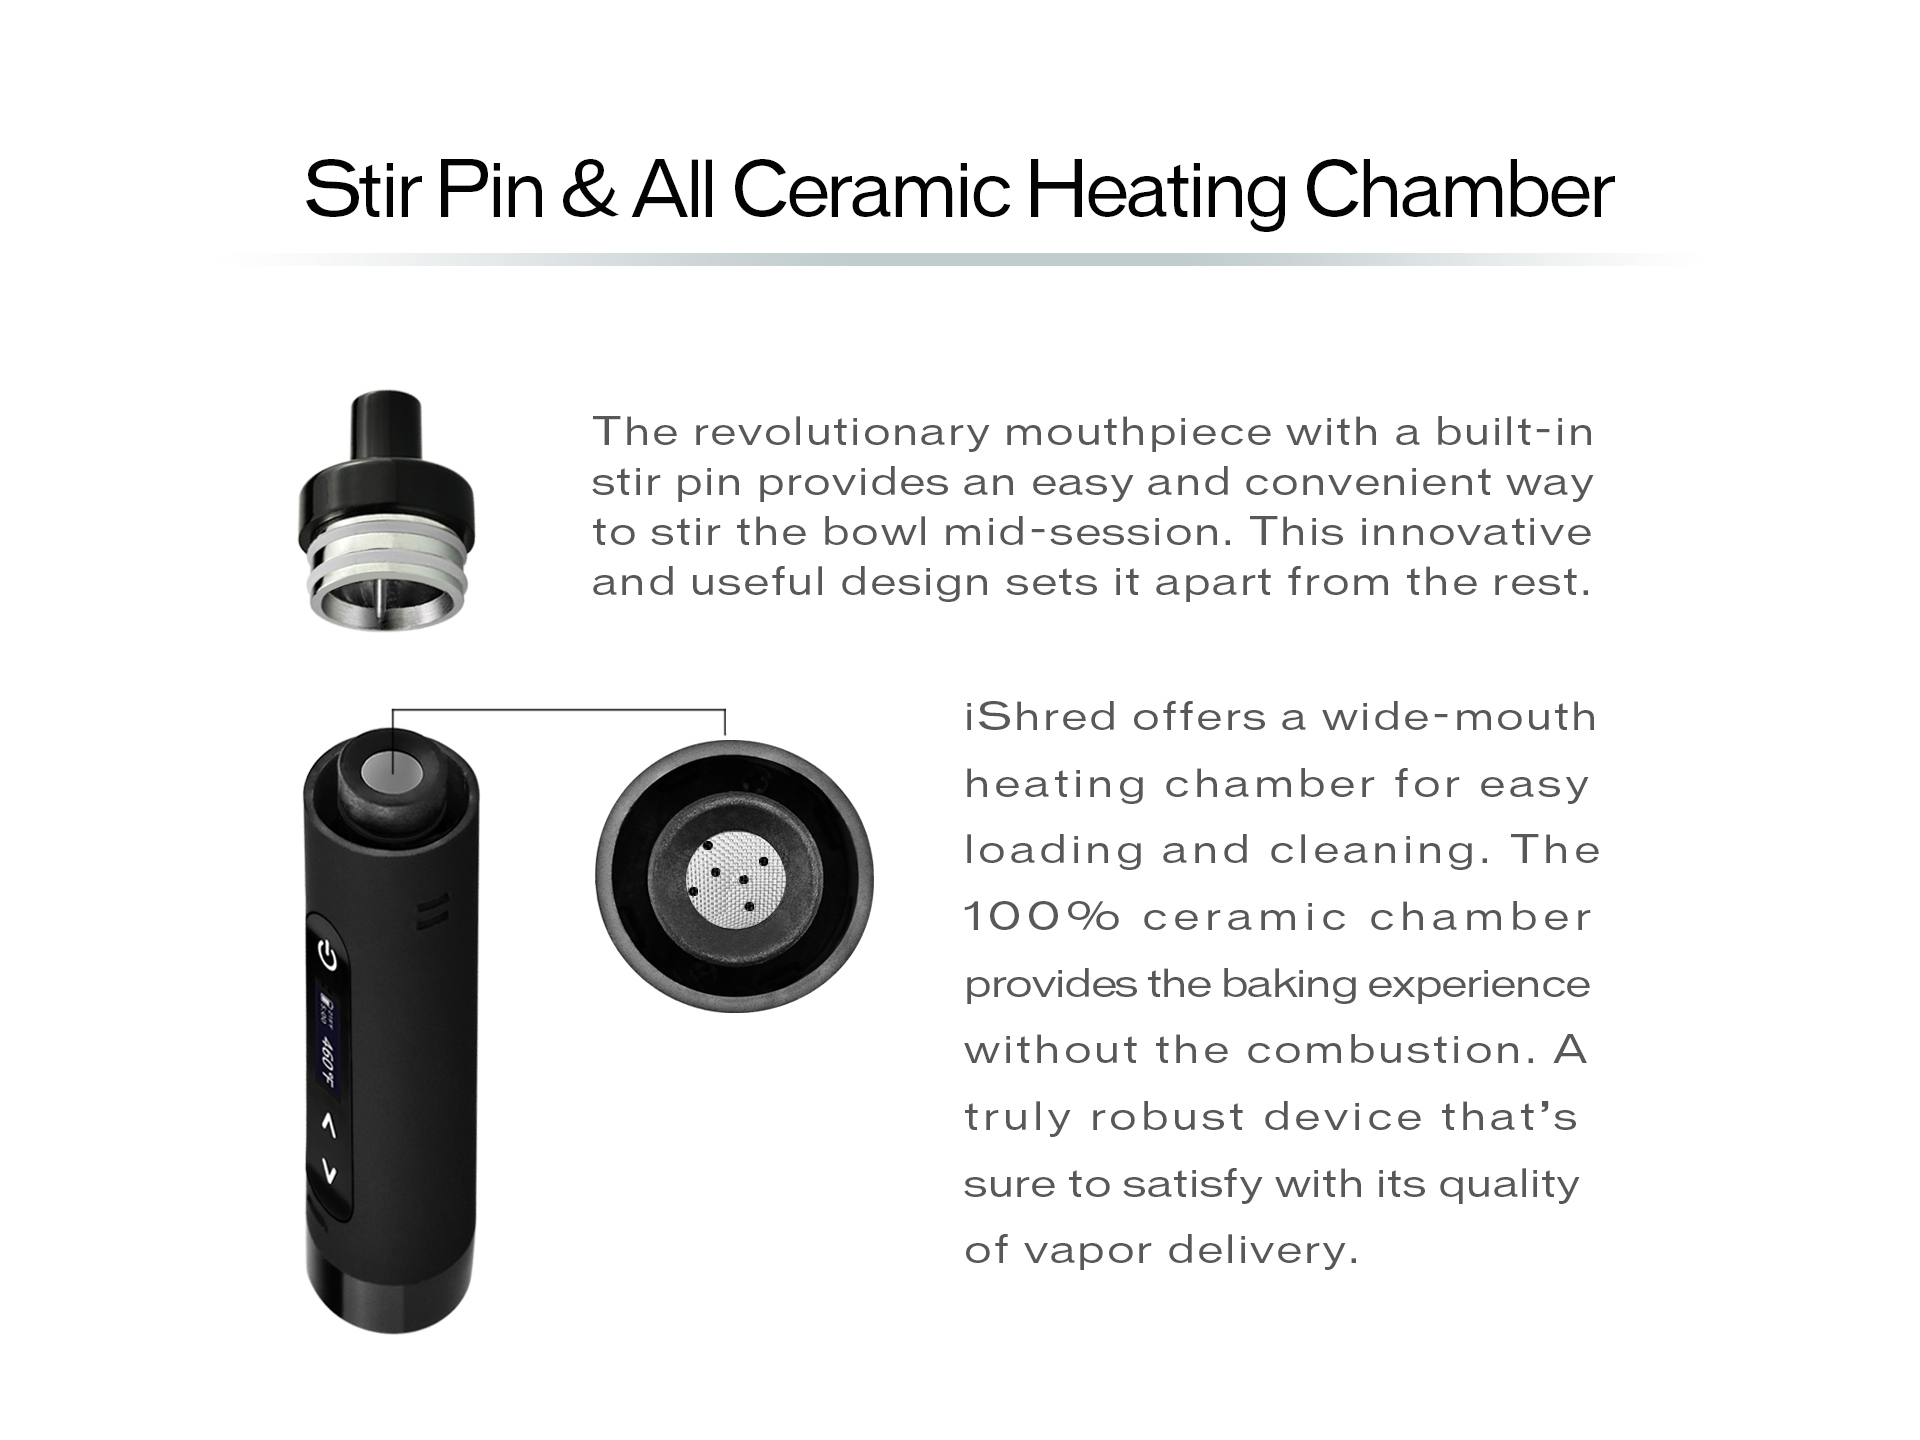 Yocan iShred offers a wide-mouth heating chamber for easy loading and cleaning.